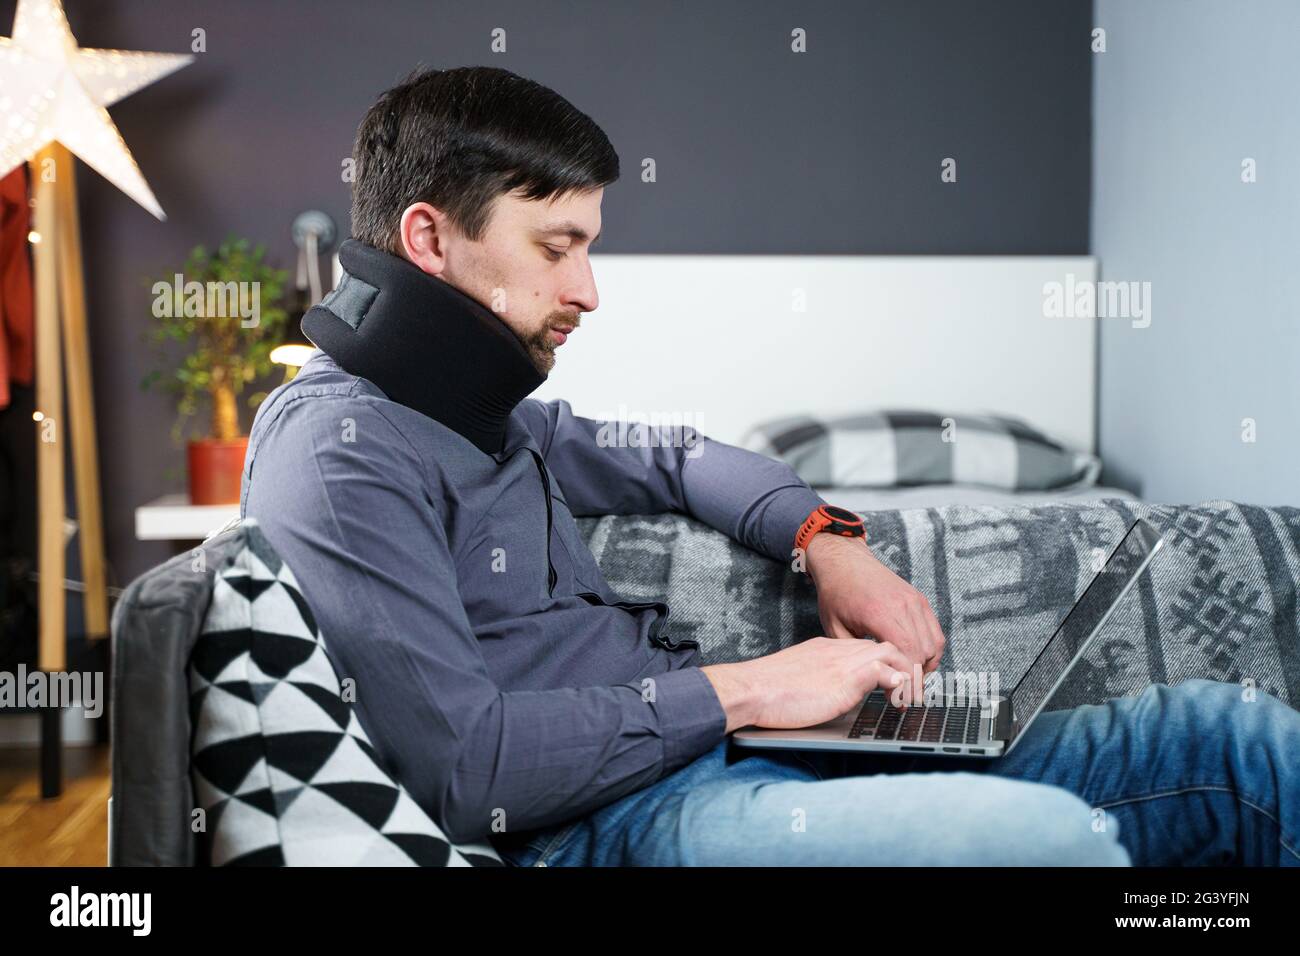 Man employee after accident working at home behind laptop and feels pain in neck, uses black neck collar support. Male with neck Stock Photo